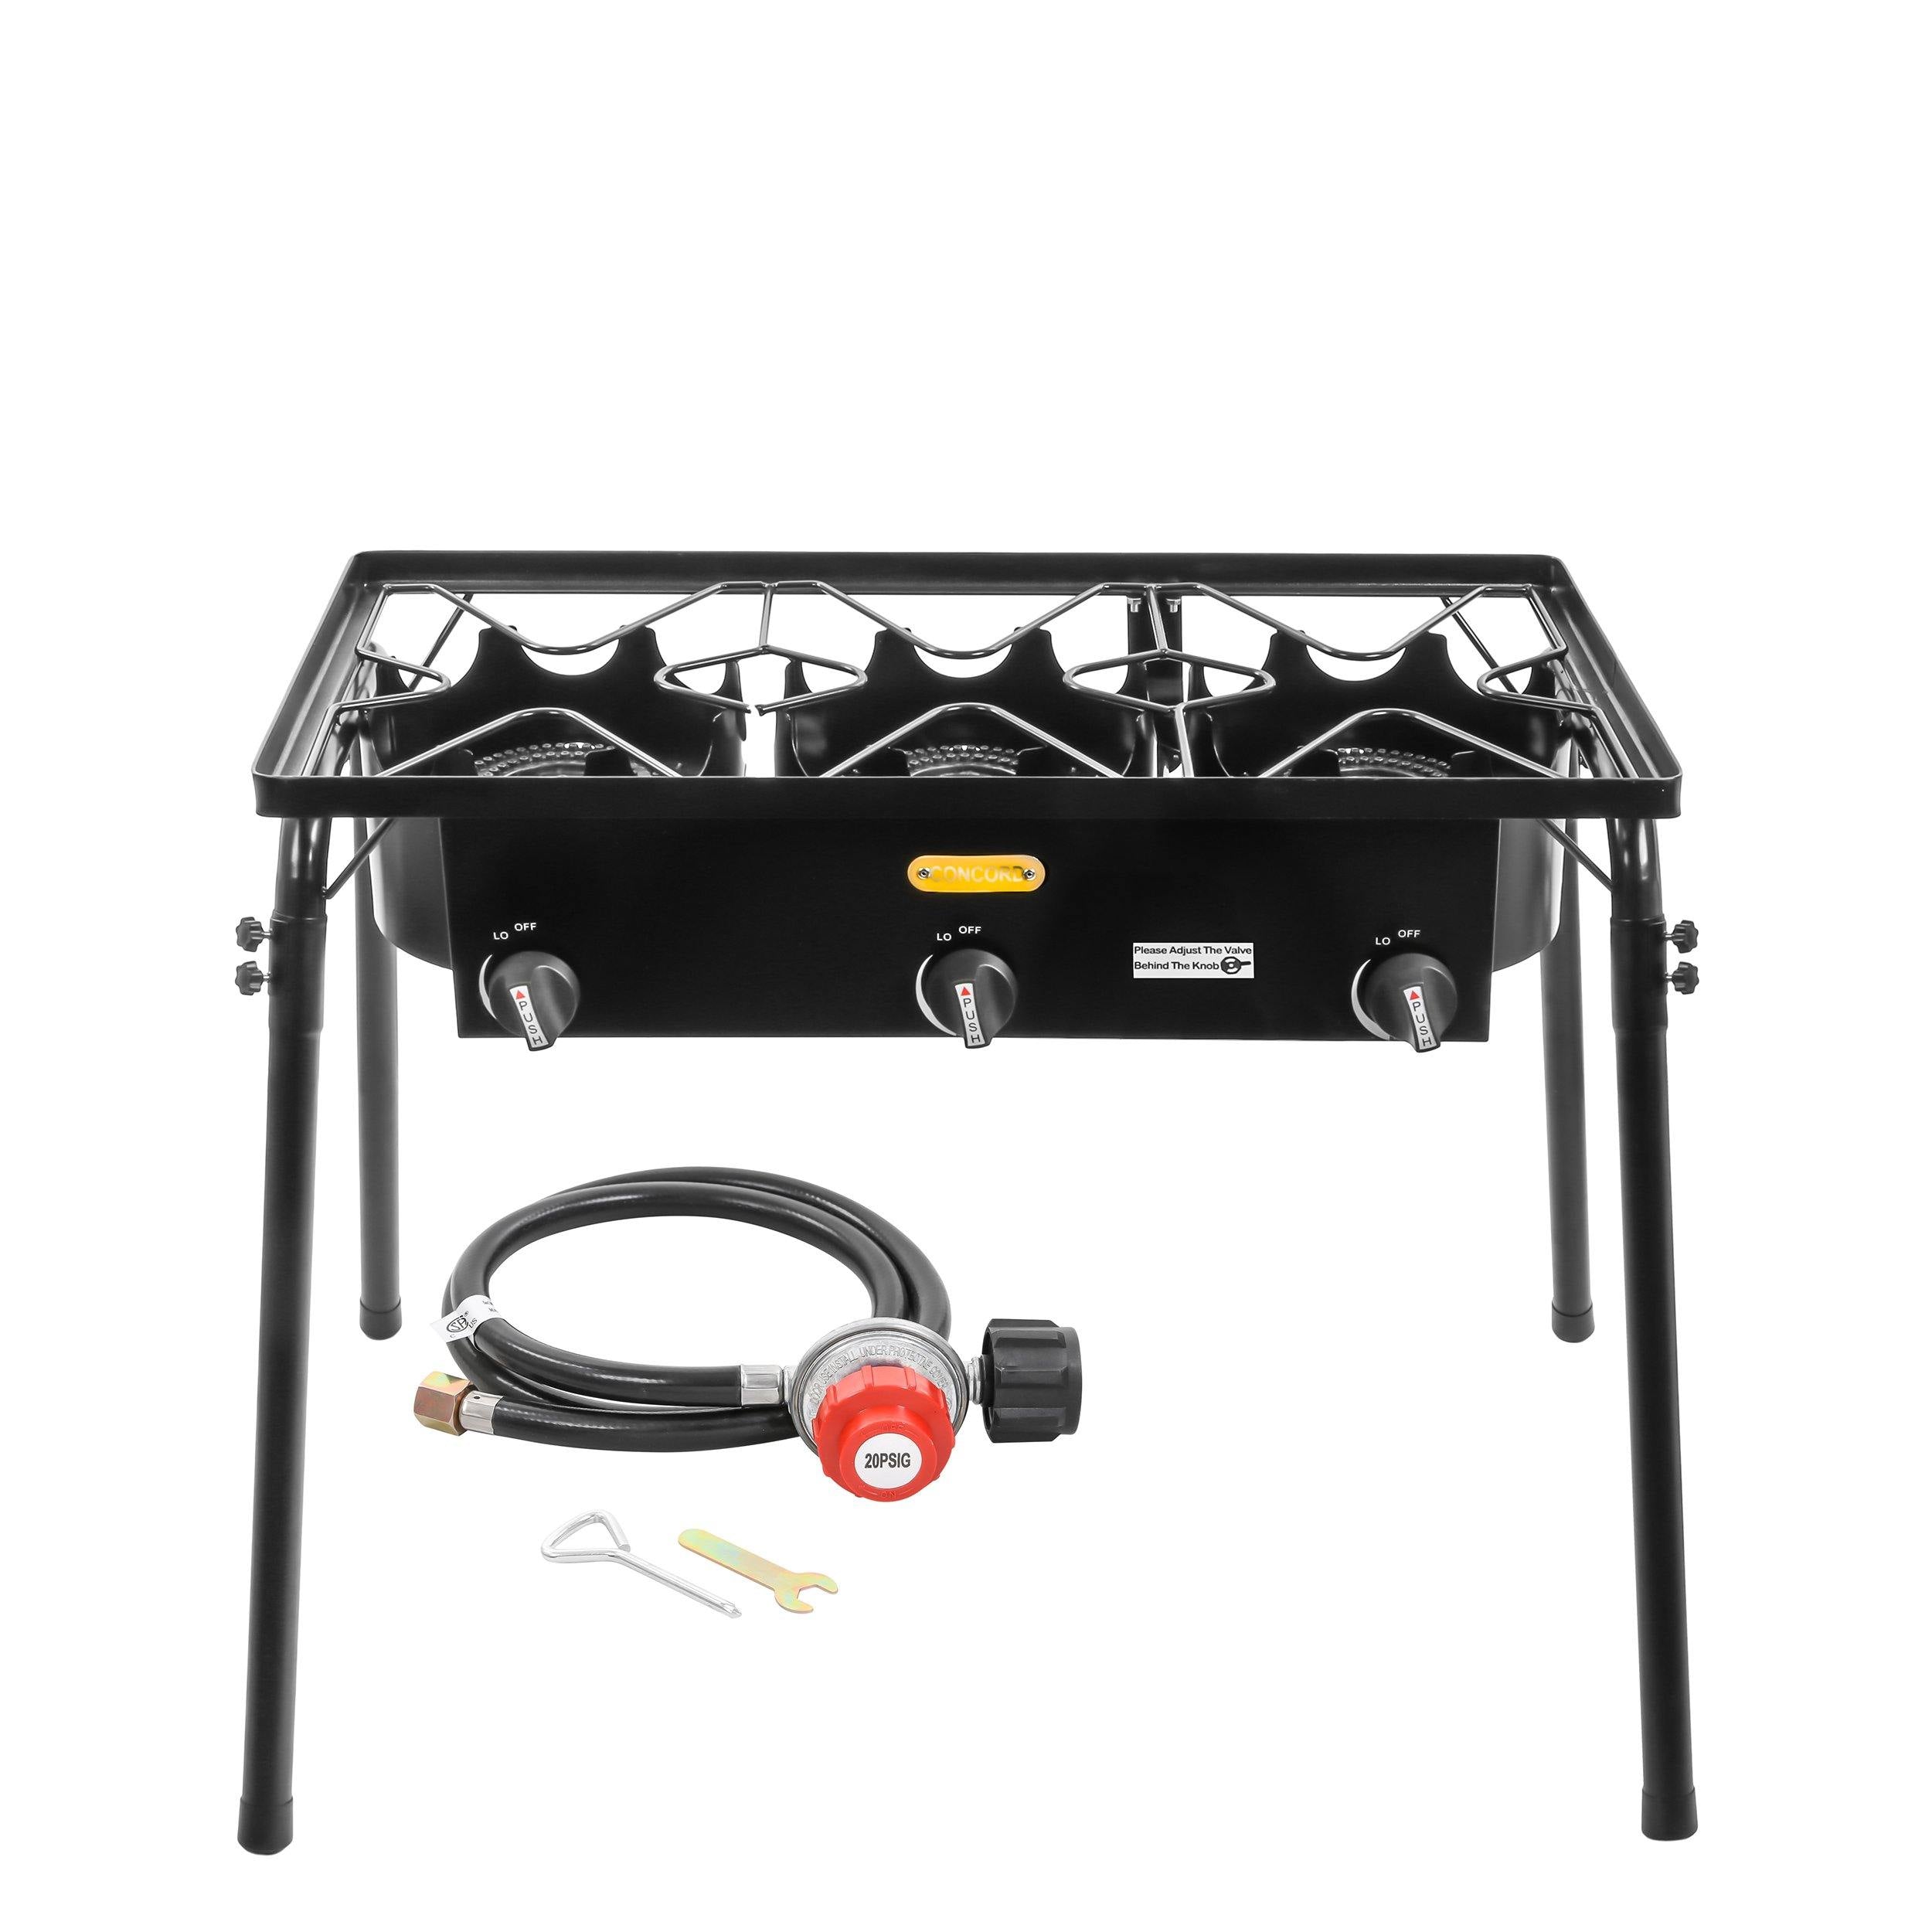 Triple Burner Outdoor Stand Stove Cooker